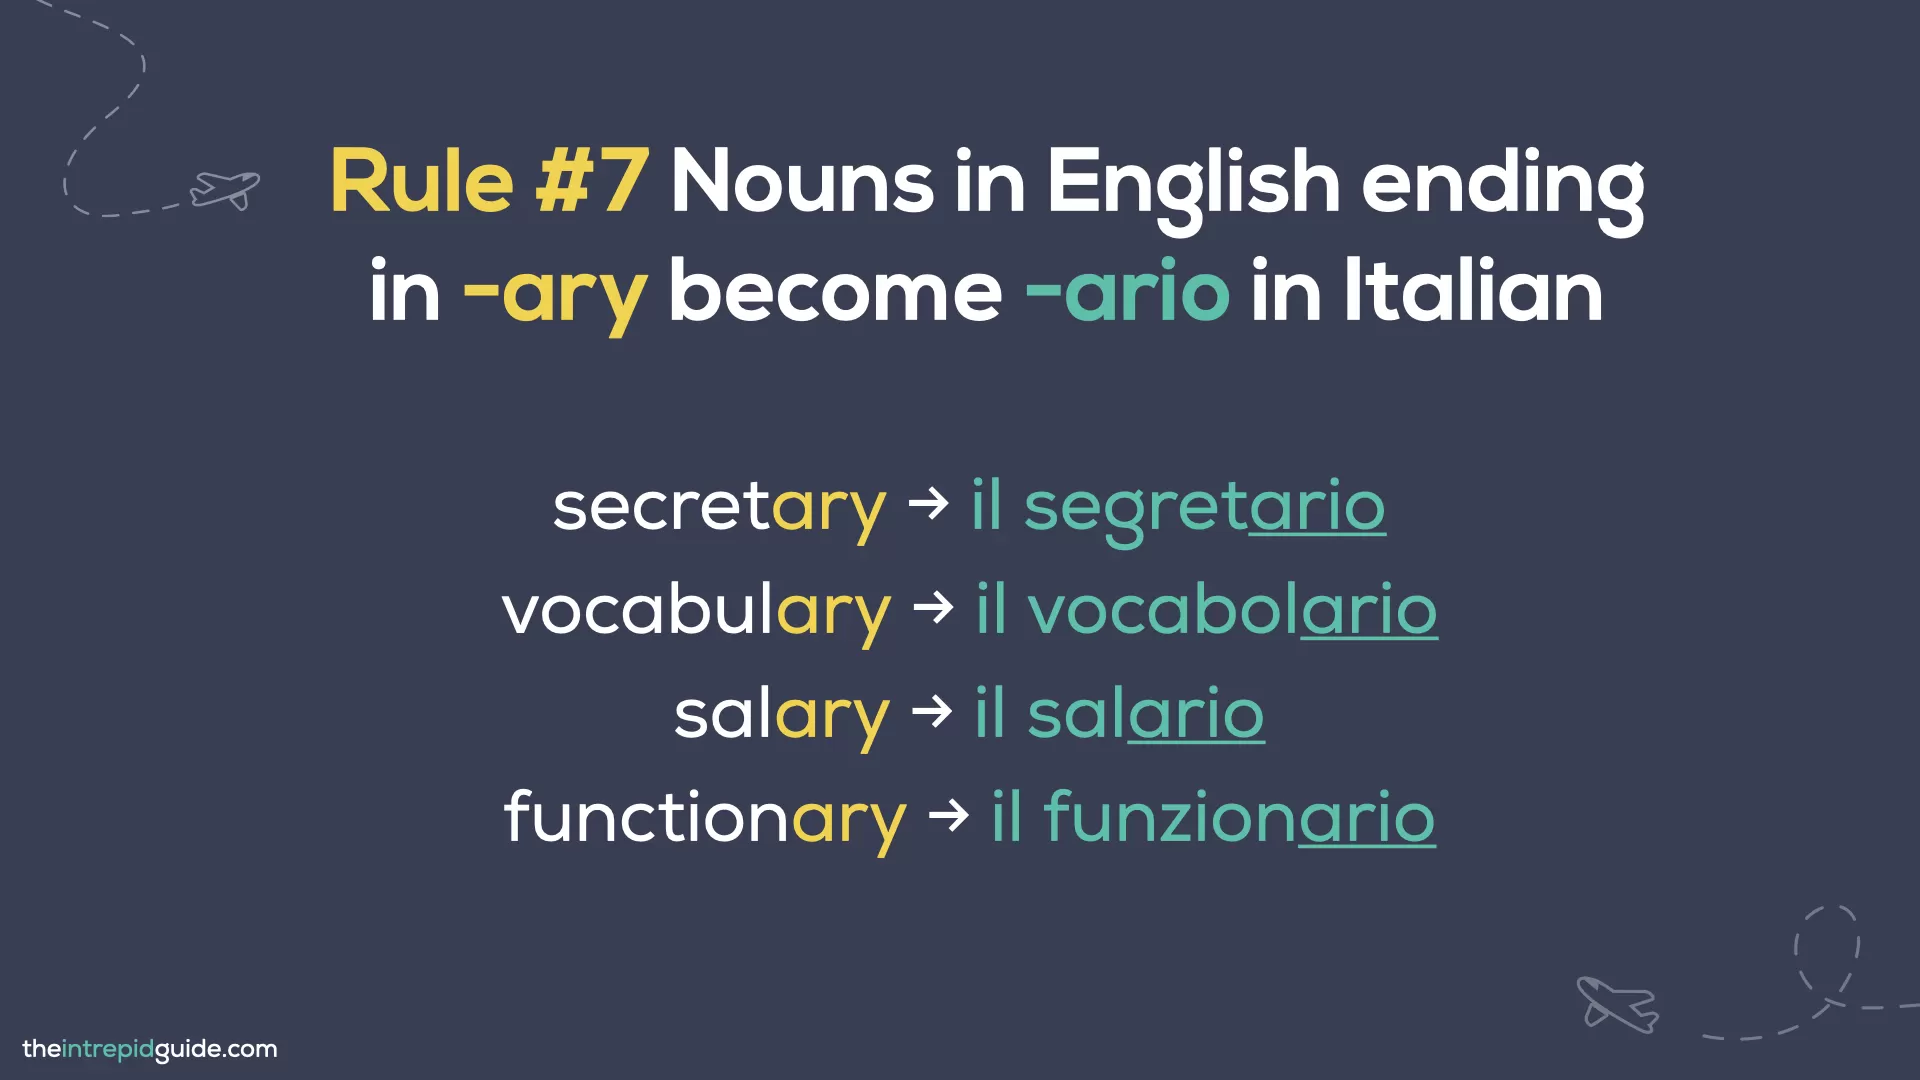 Italian cognates and loan words - Rule 7 - Nouns in English ending in -ary become -ario in Italian